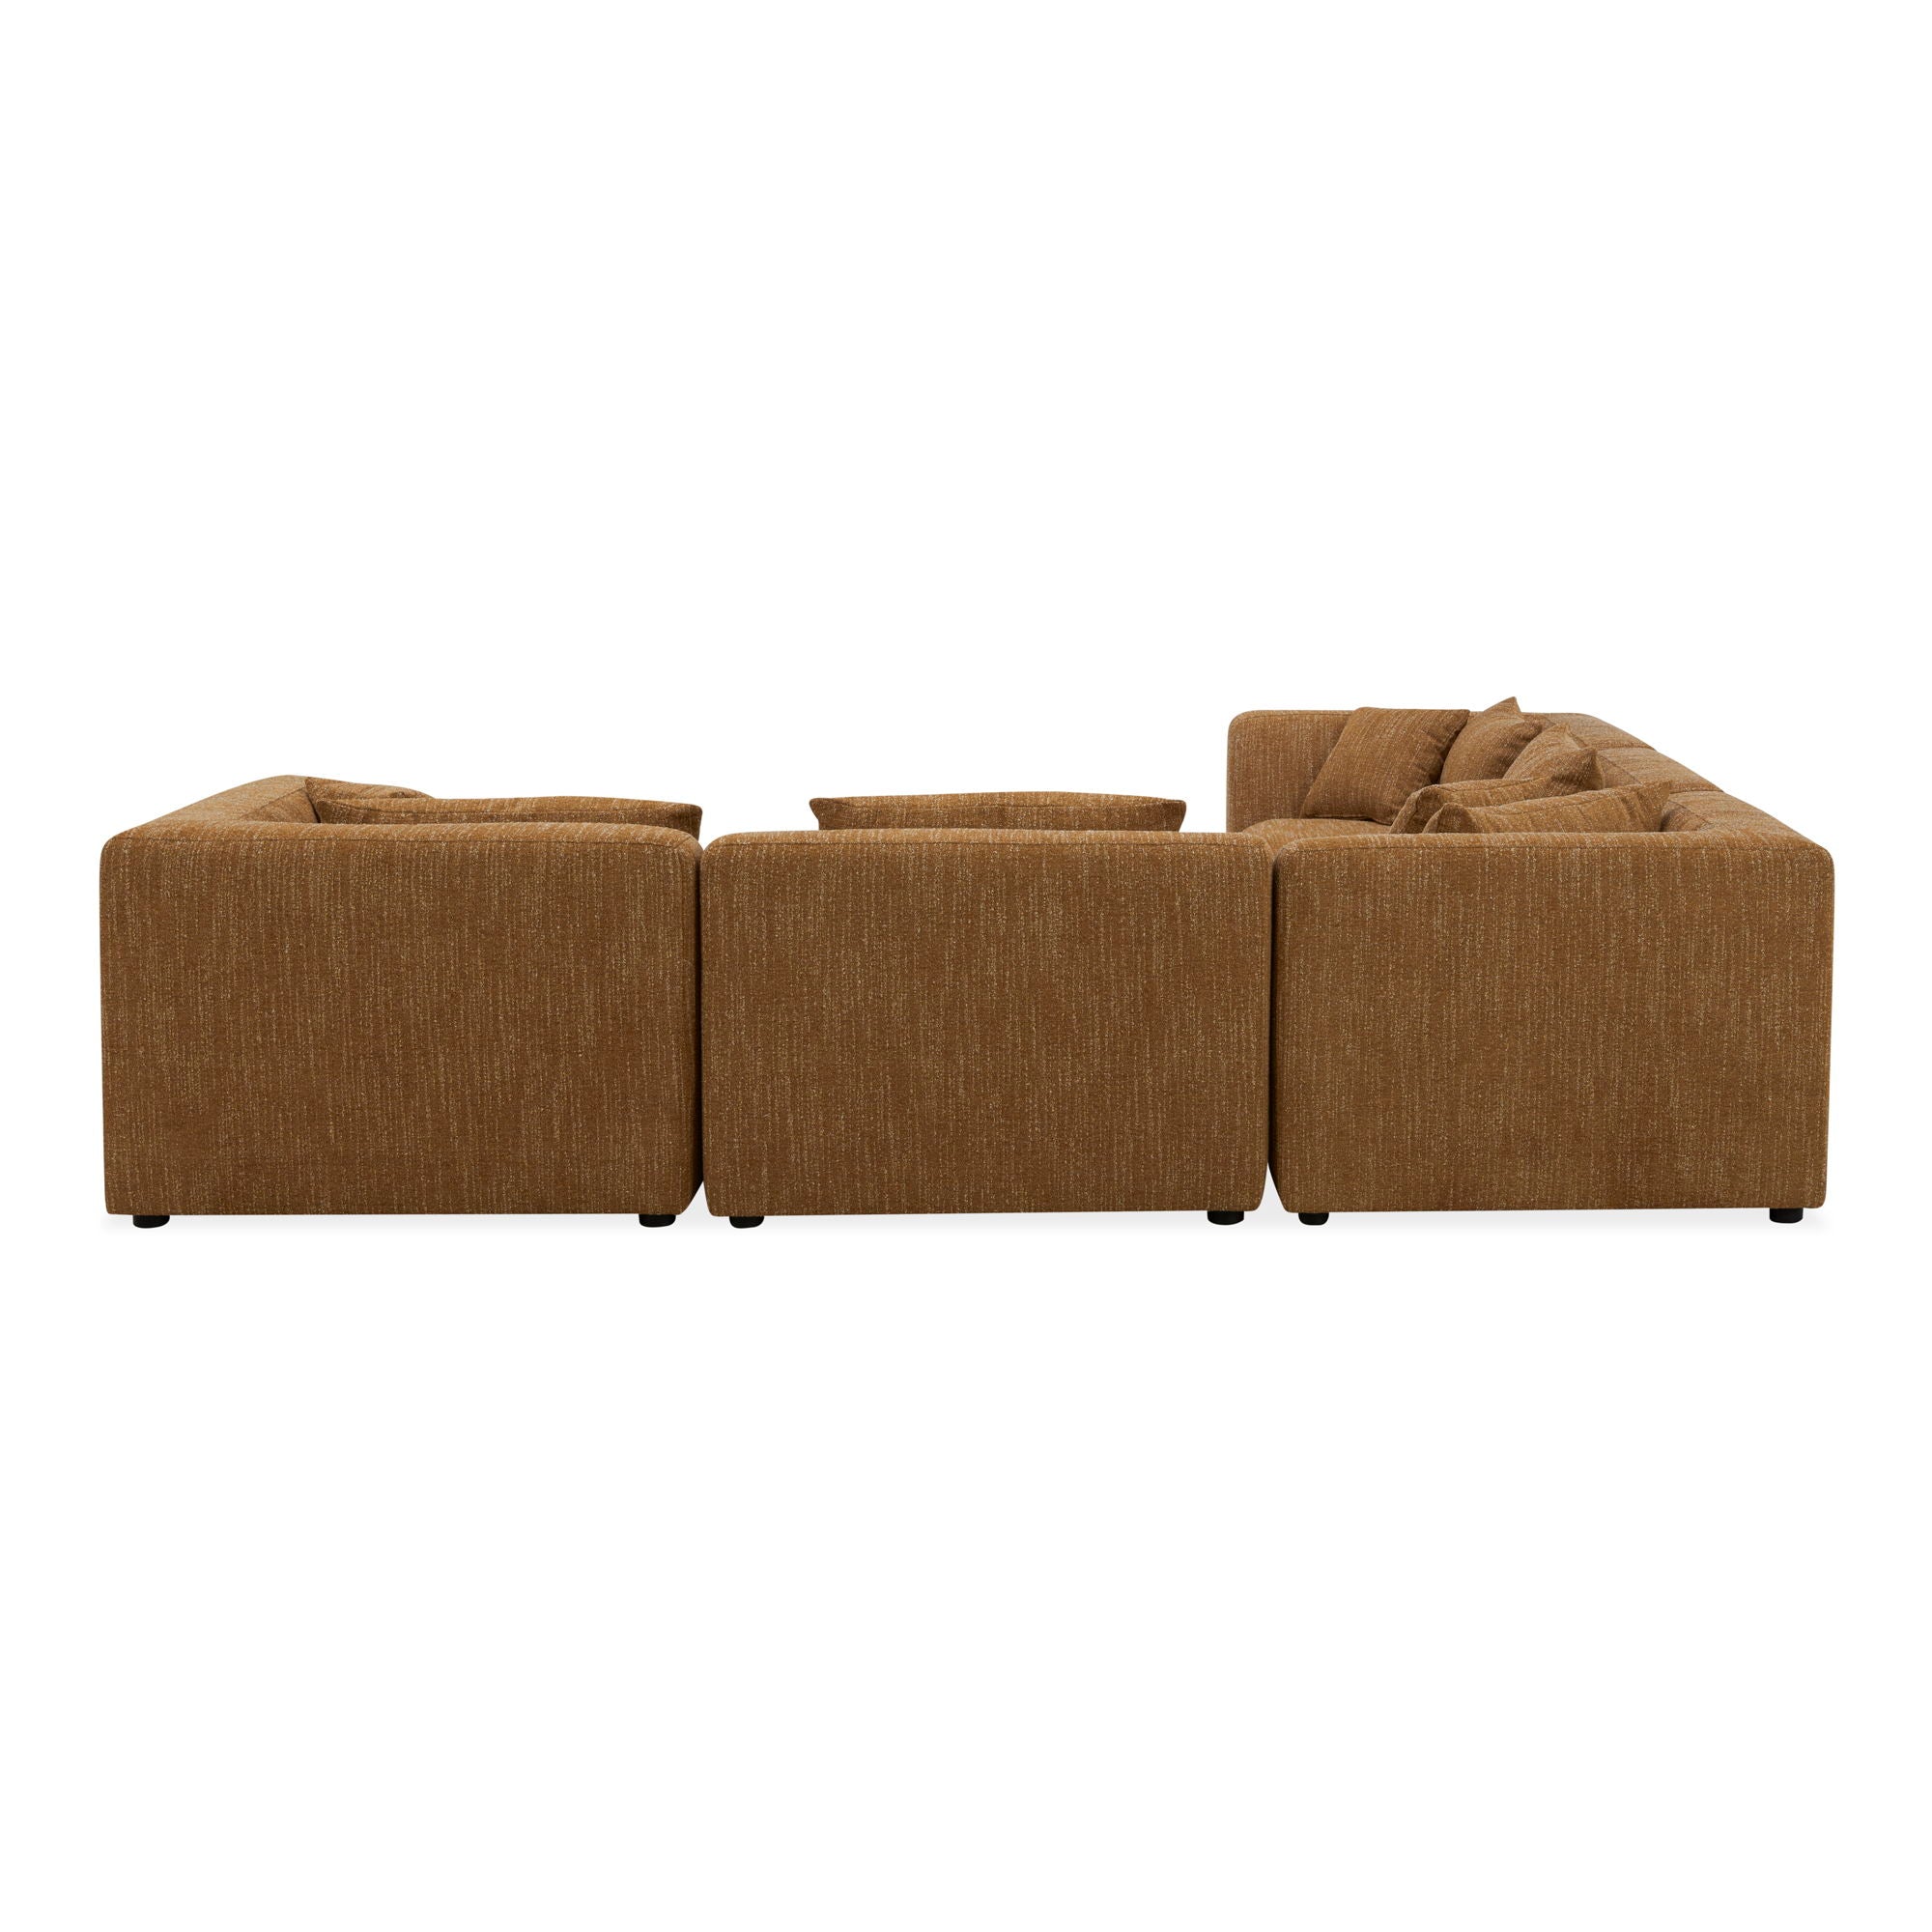 Lowtide - Classic L Modular Sectional - Amber Glow-Stationary Sectionals-American Furniture Outlet